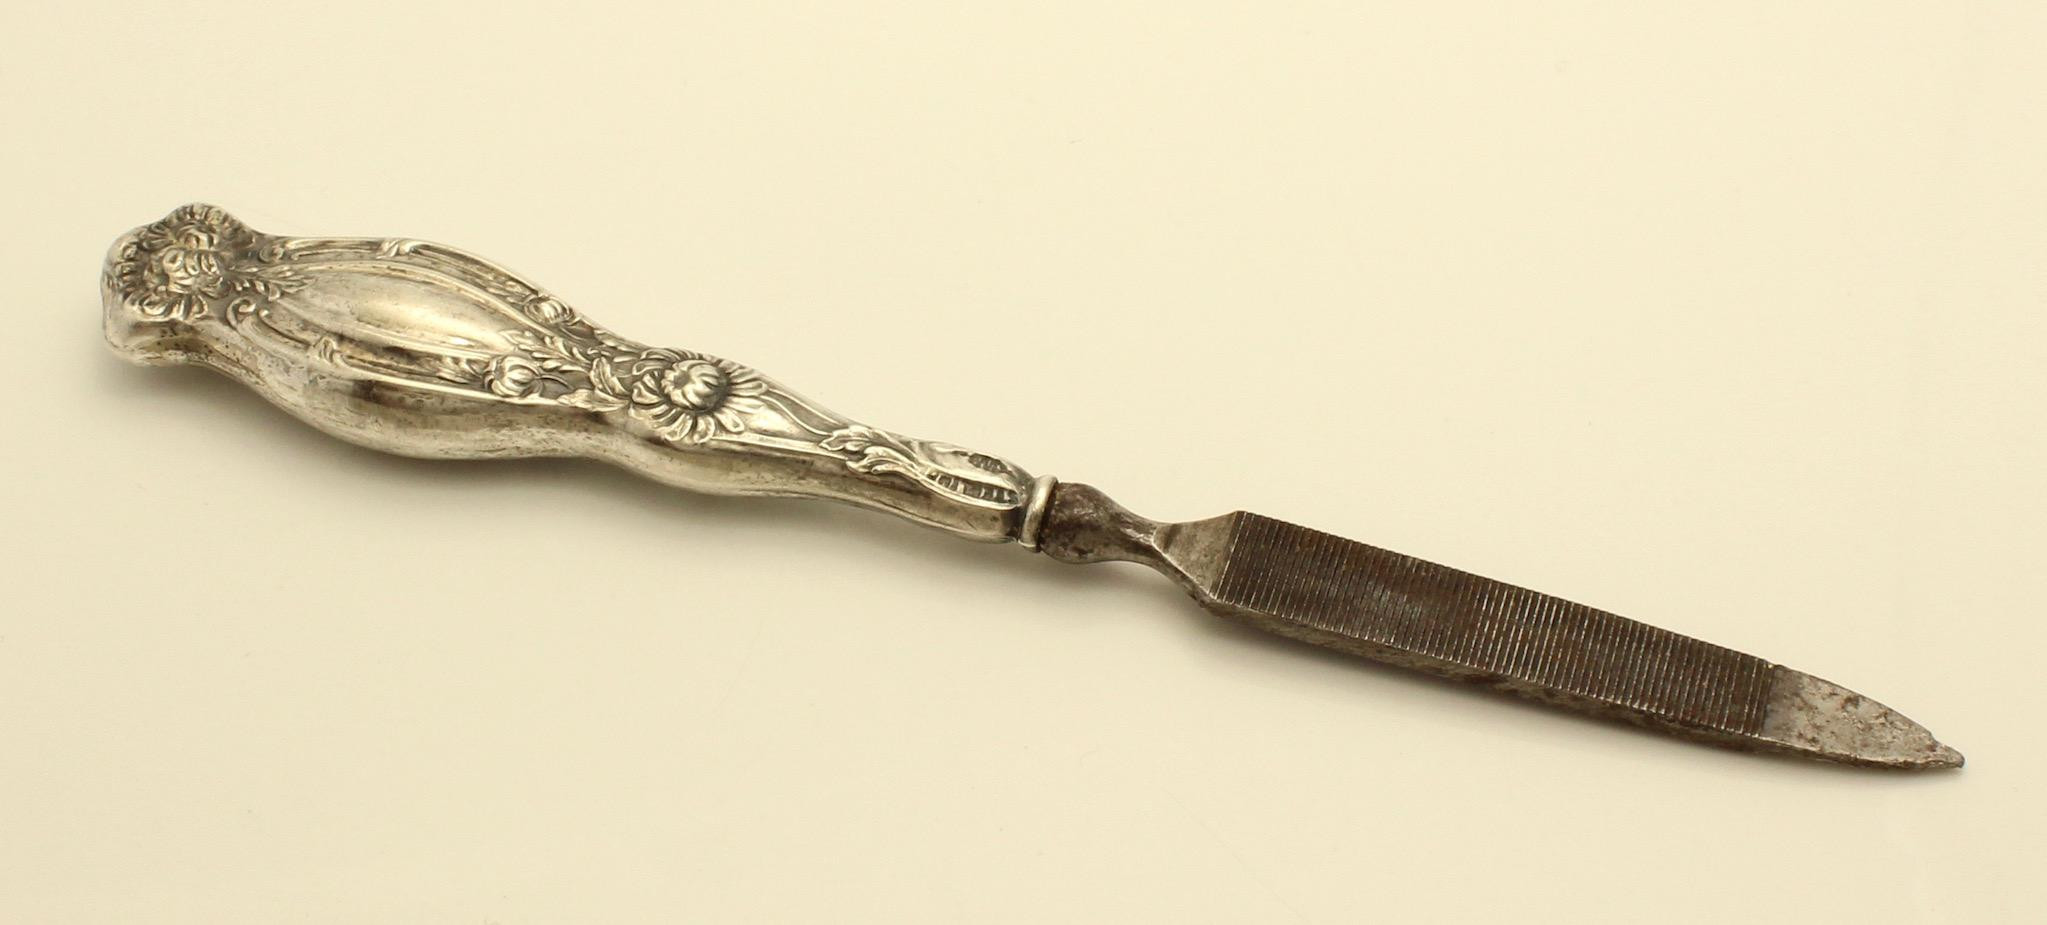 Pretty Nails Oswego Ny
 Antique Art Nouveau Sterling Floral Nail File by Webster